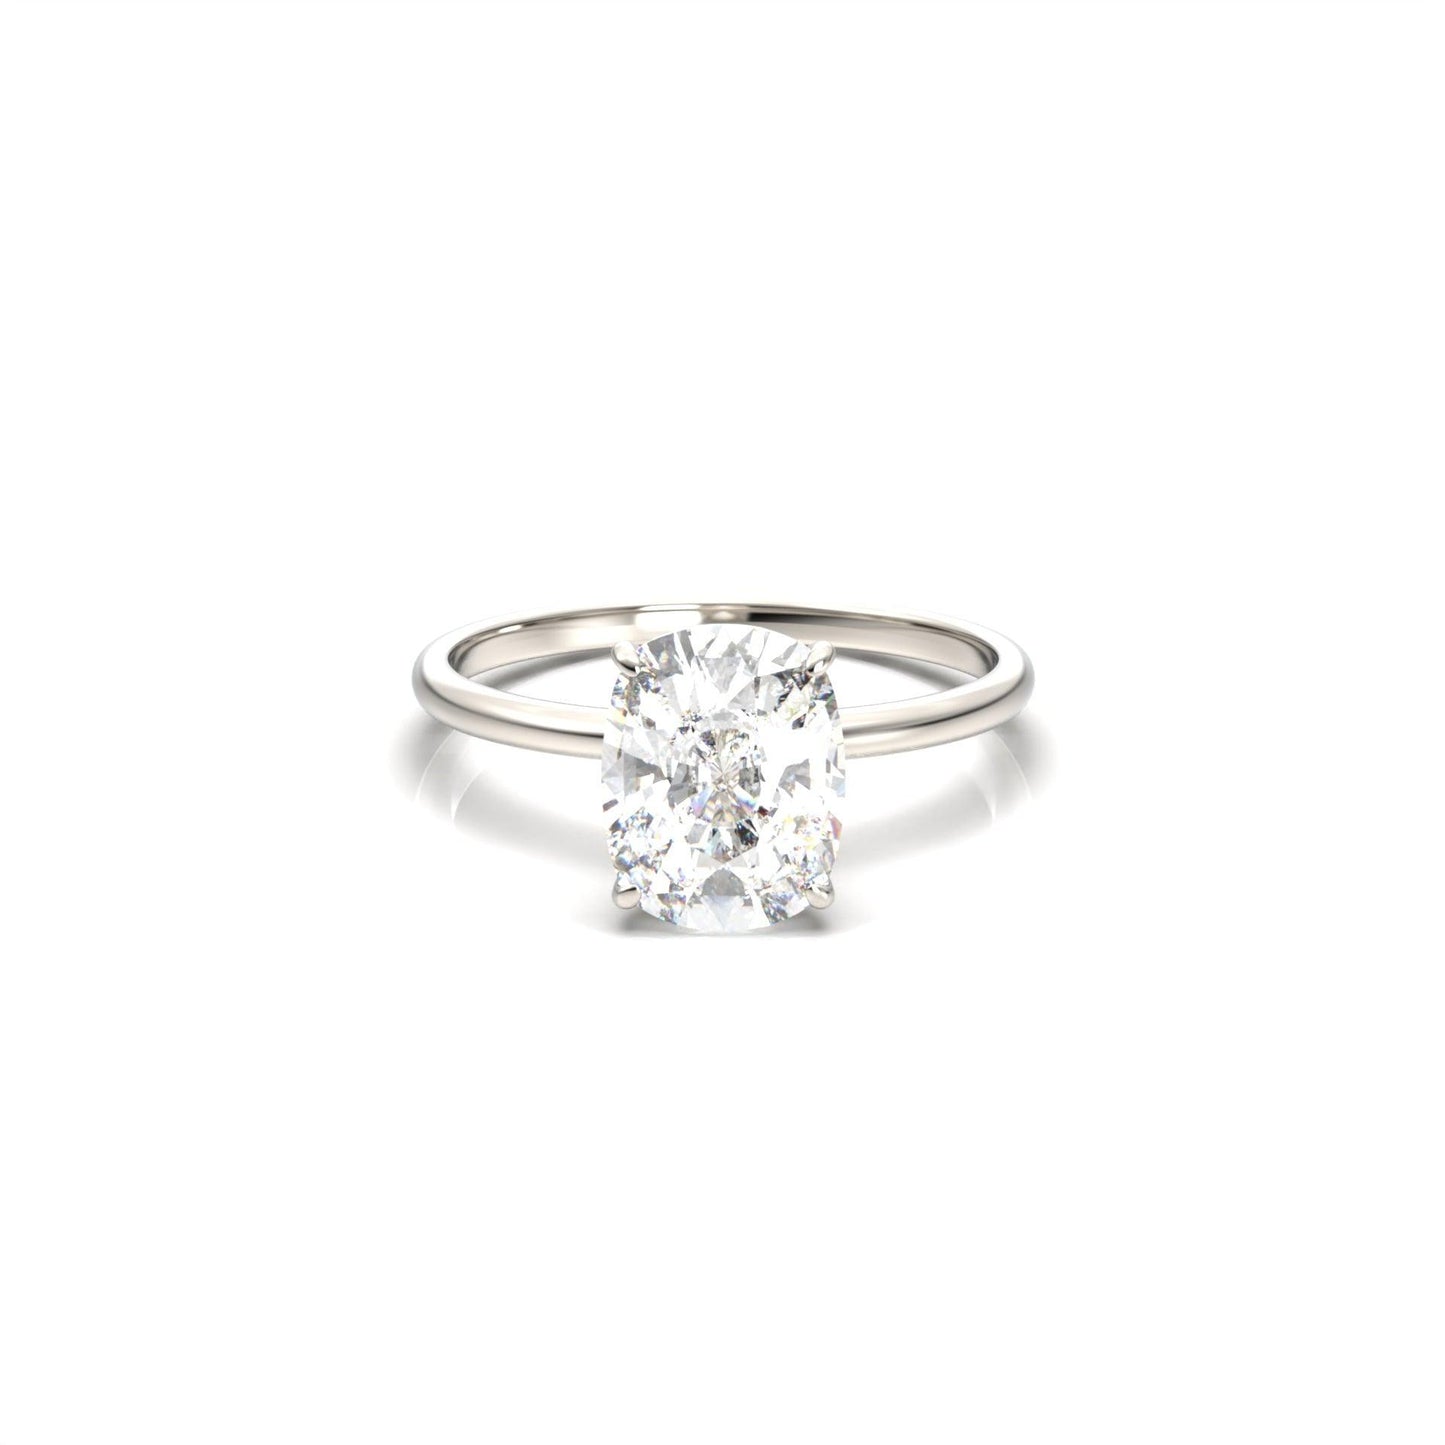 Elongated Cushion Cut Solitaire 4 Claw With Hidden Halo Moissanite Engagement Ring - moissaniteengagementrings